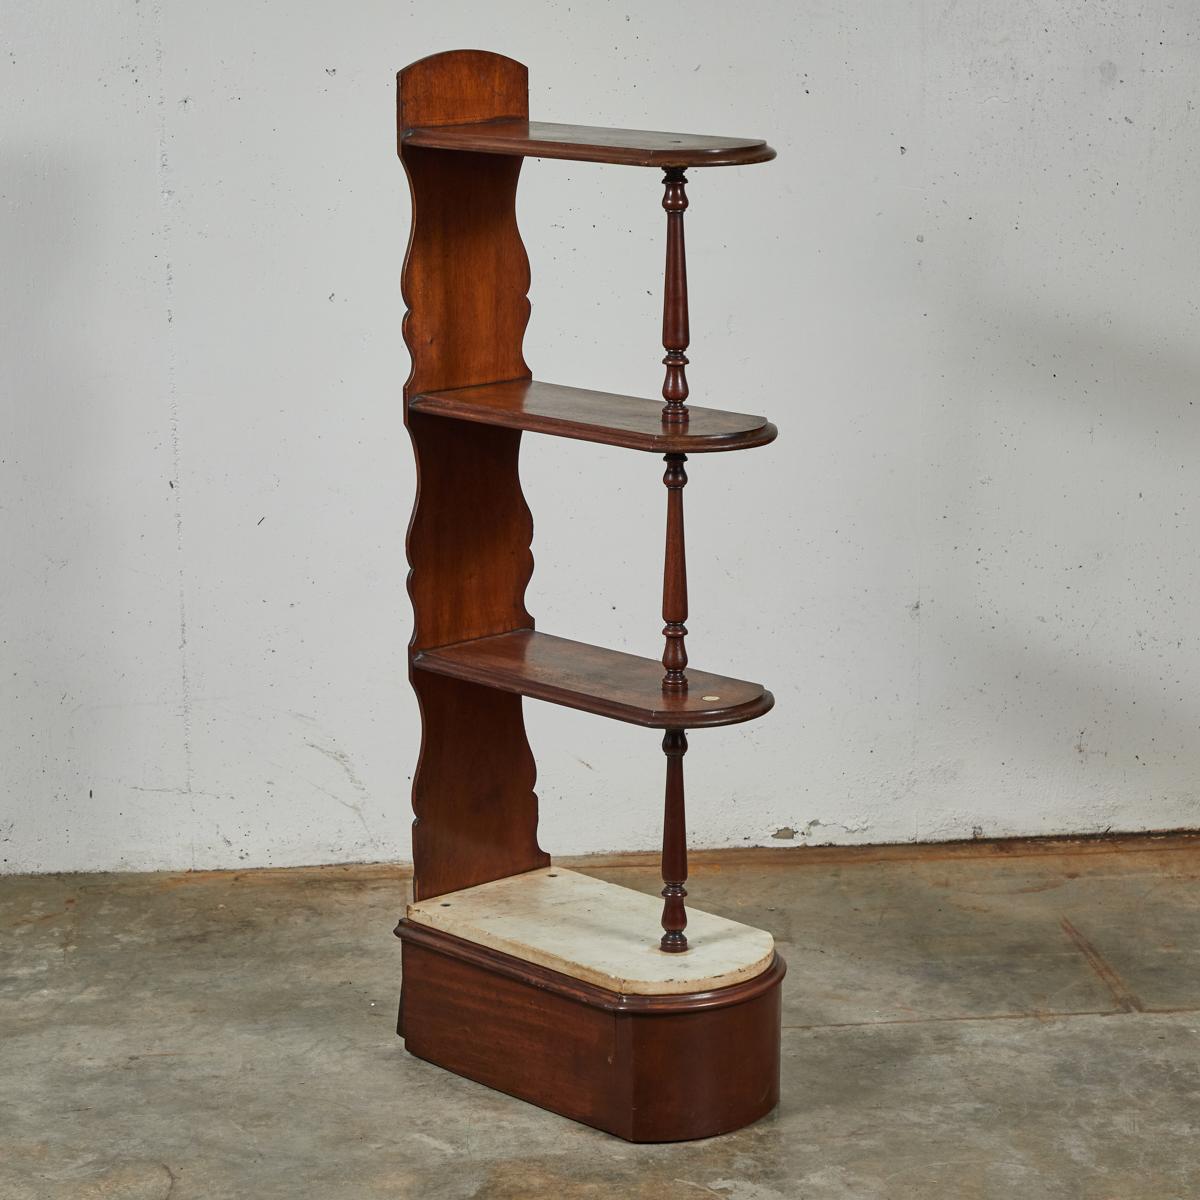 Late 19th-century English mahogany chemist's shelf. The elliptical shelves are connected on either side by a thin turned column and flat beveled support. The base is finished with an ivory-colored marble top, and conceals a secret back